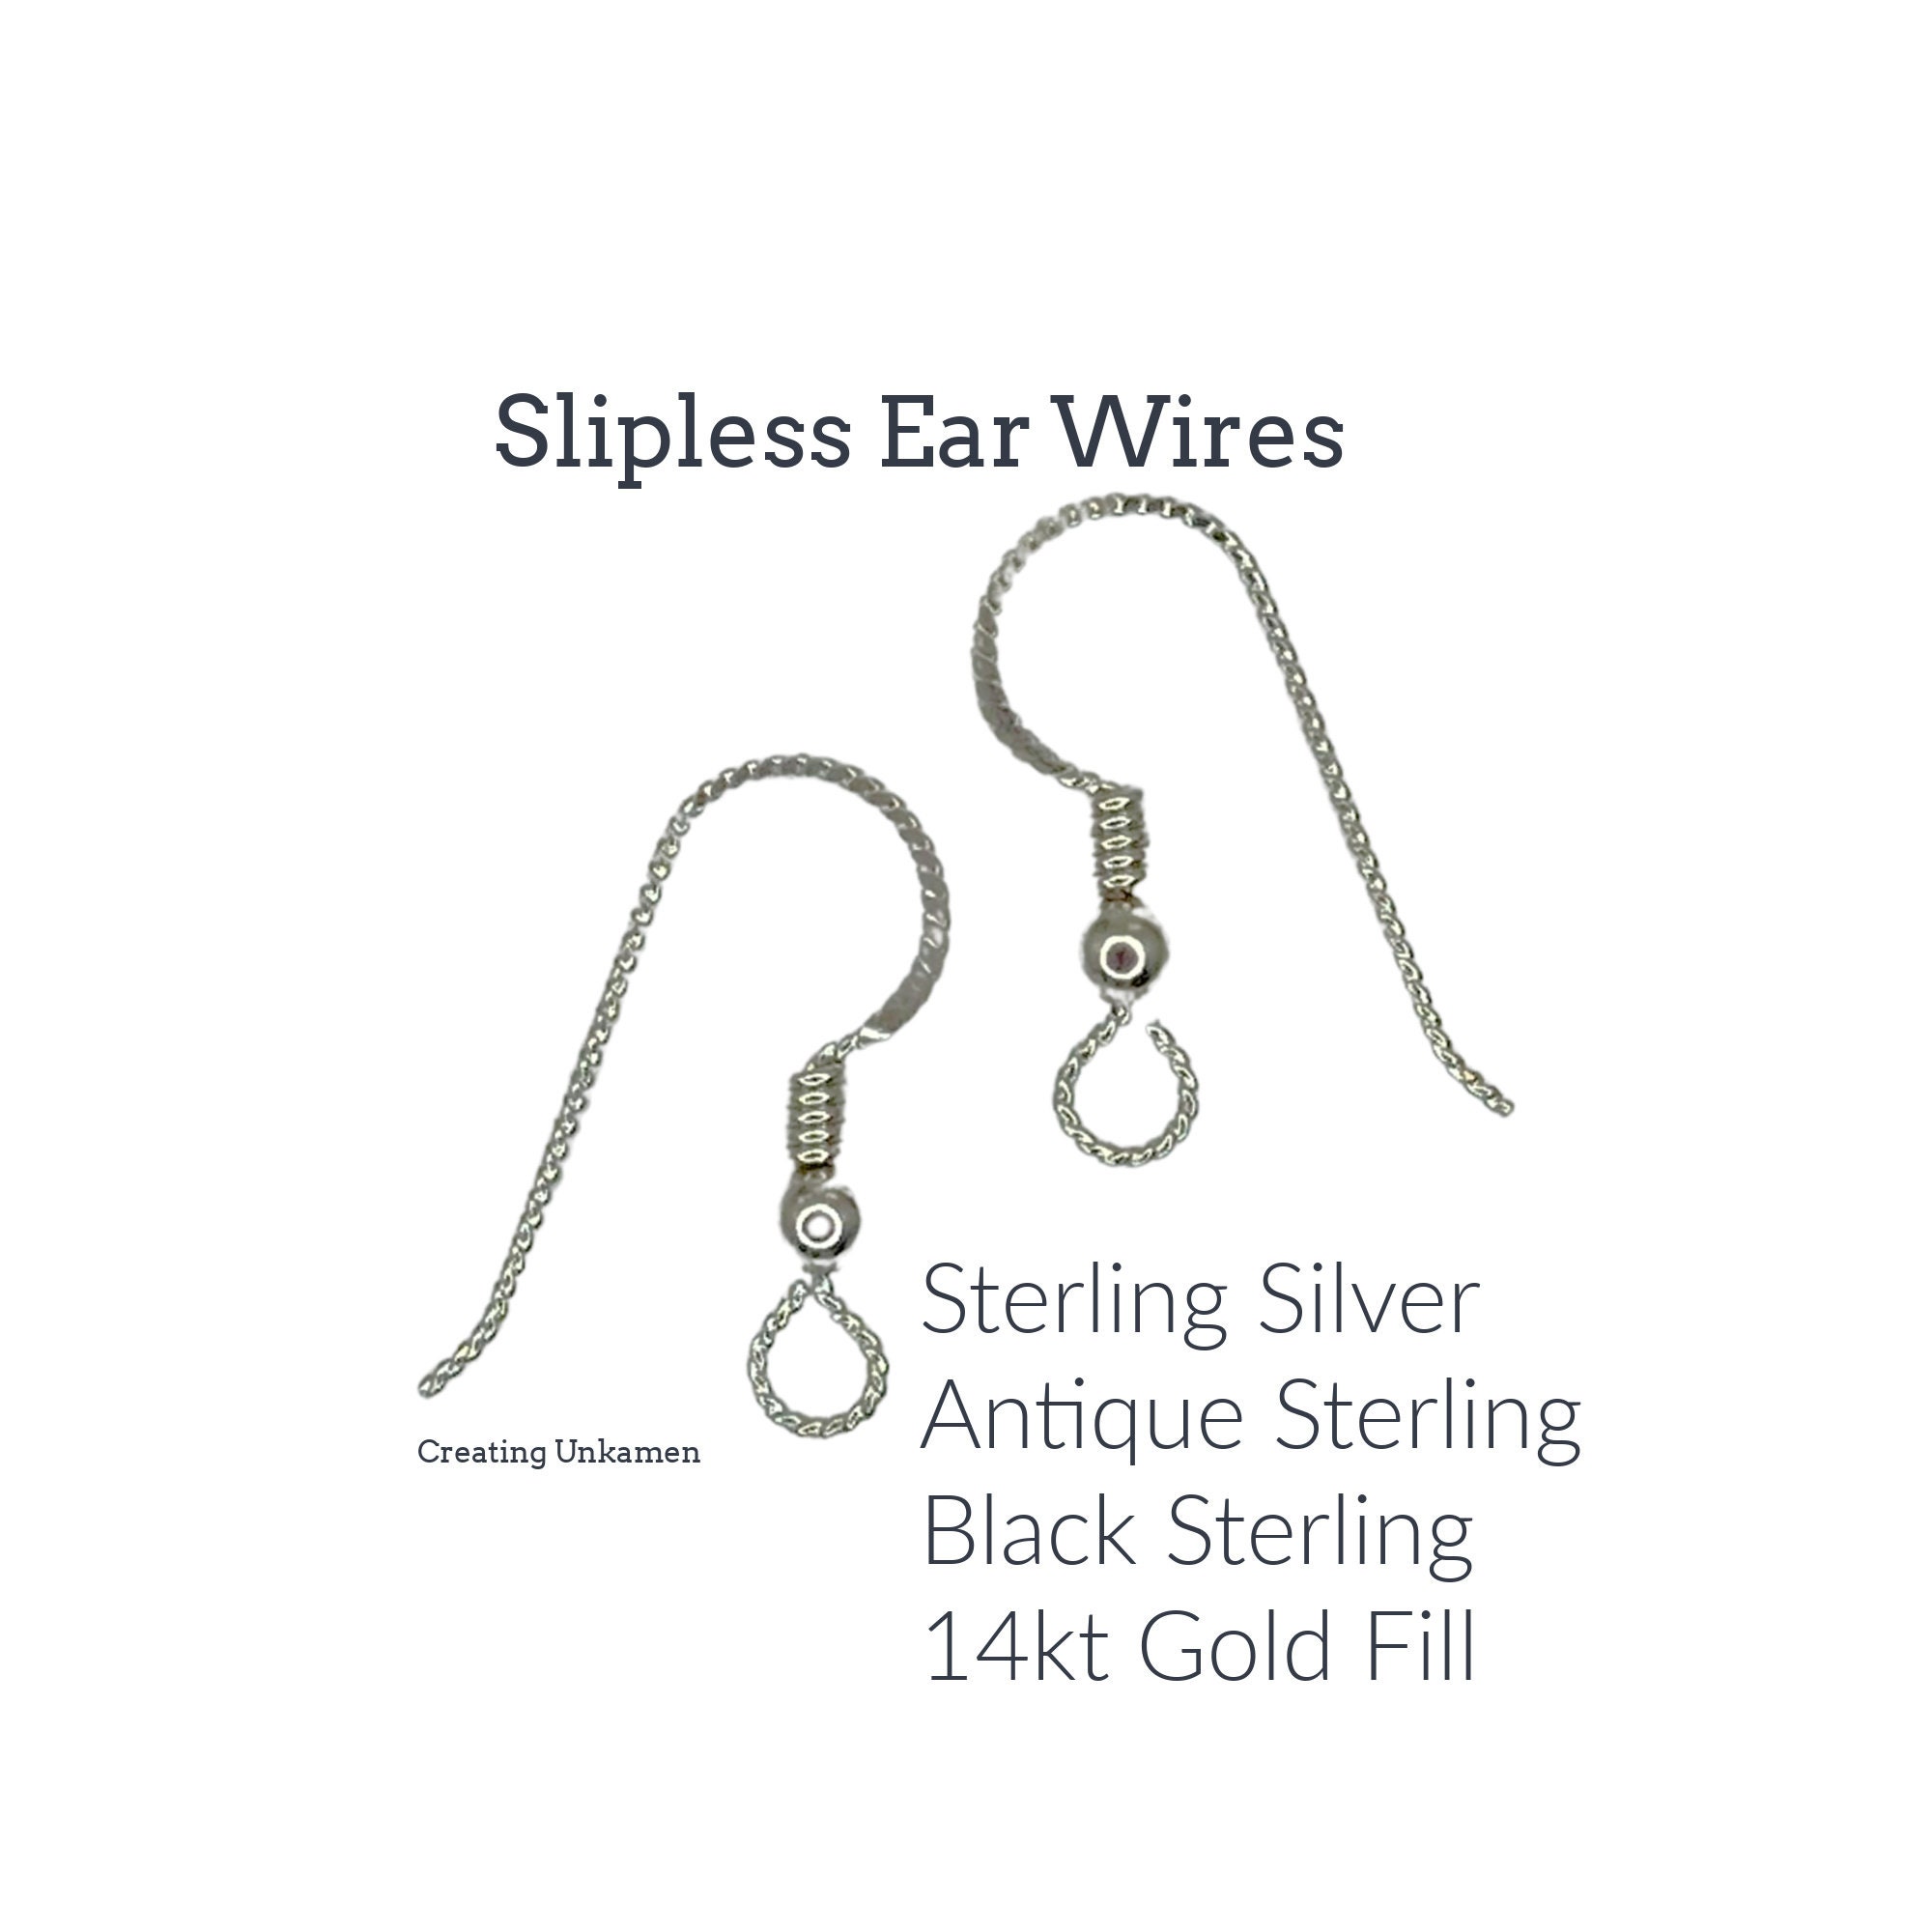 2 Pairs Ear Wires Sterling Silver or 14kt Gold Filled Slipless